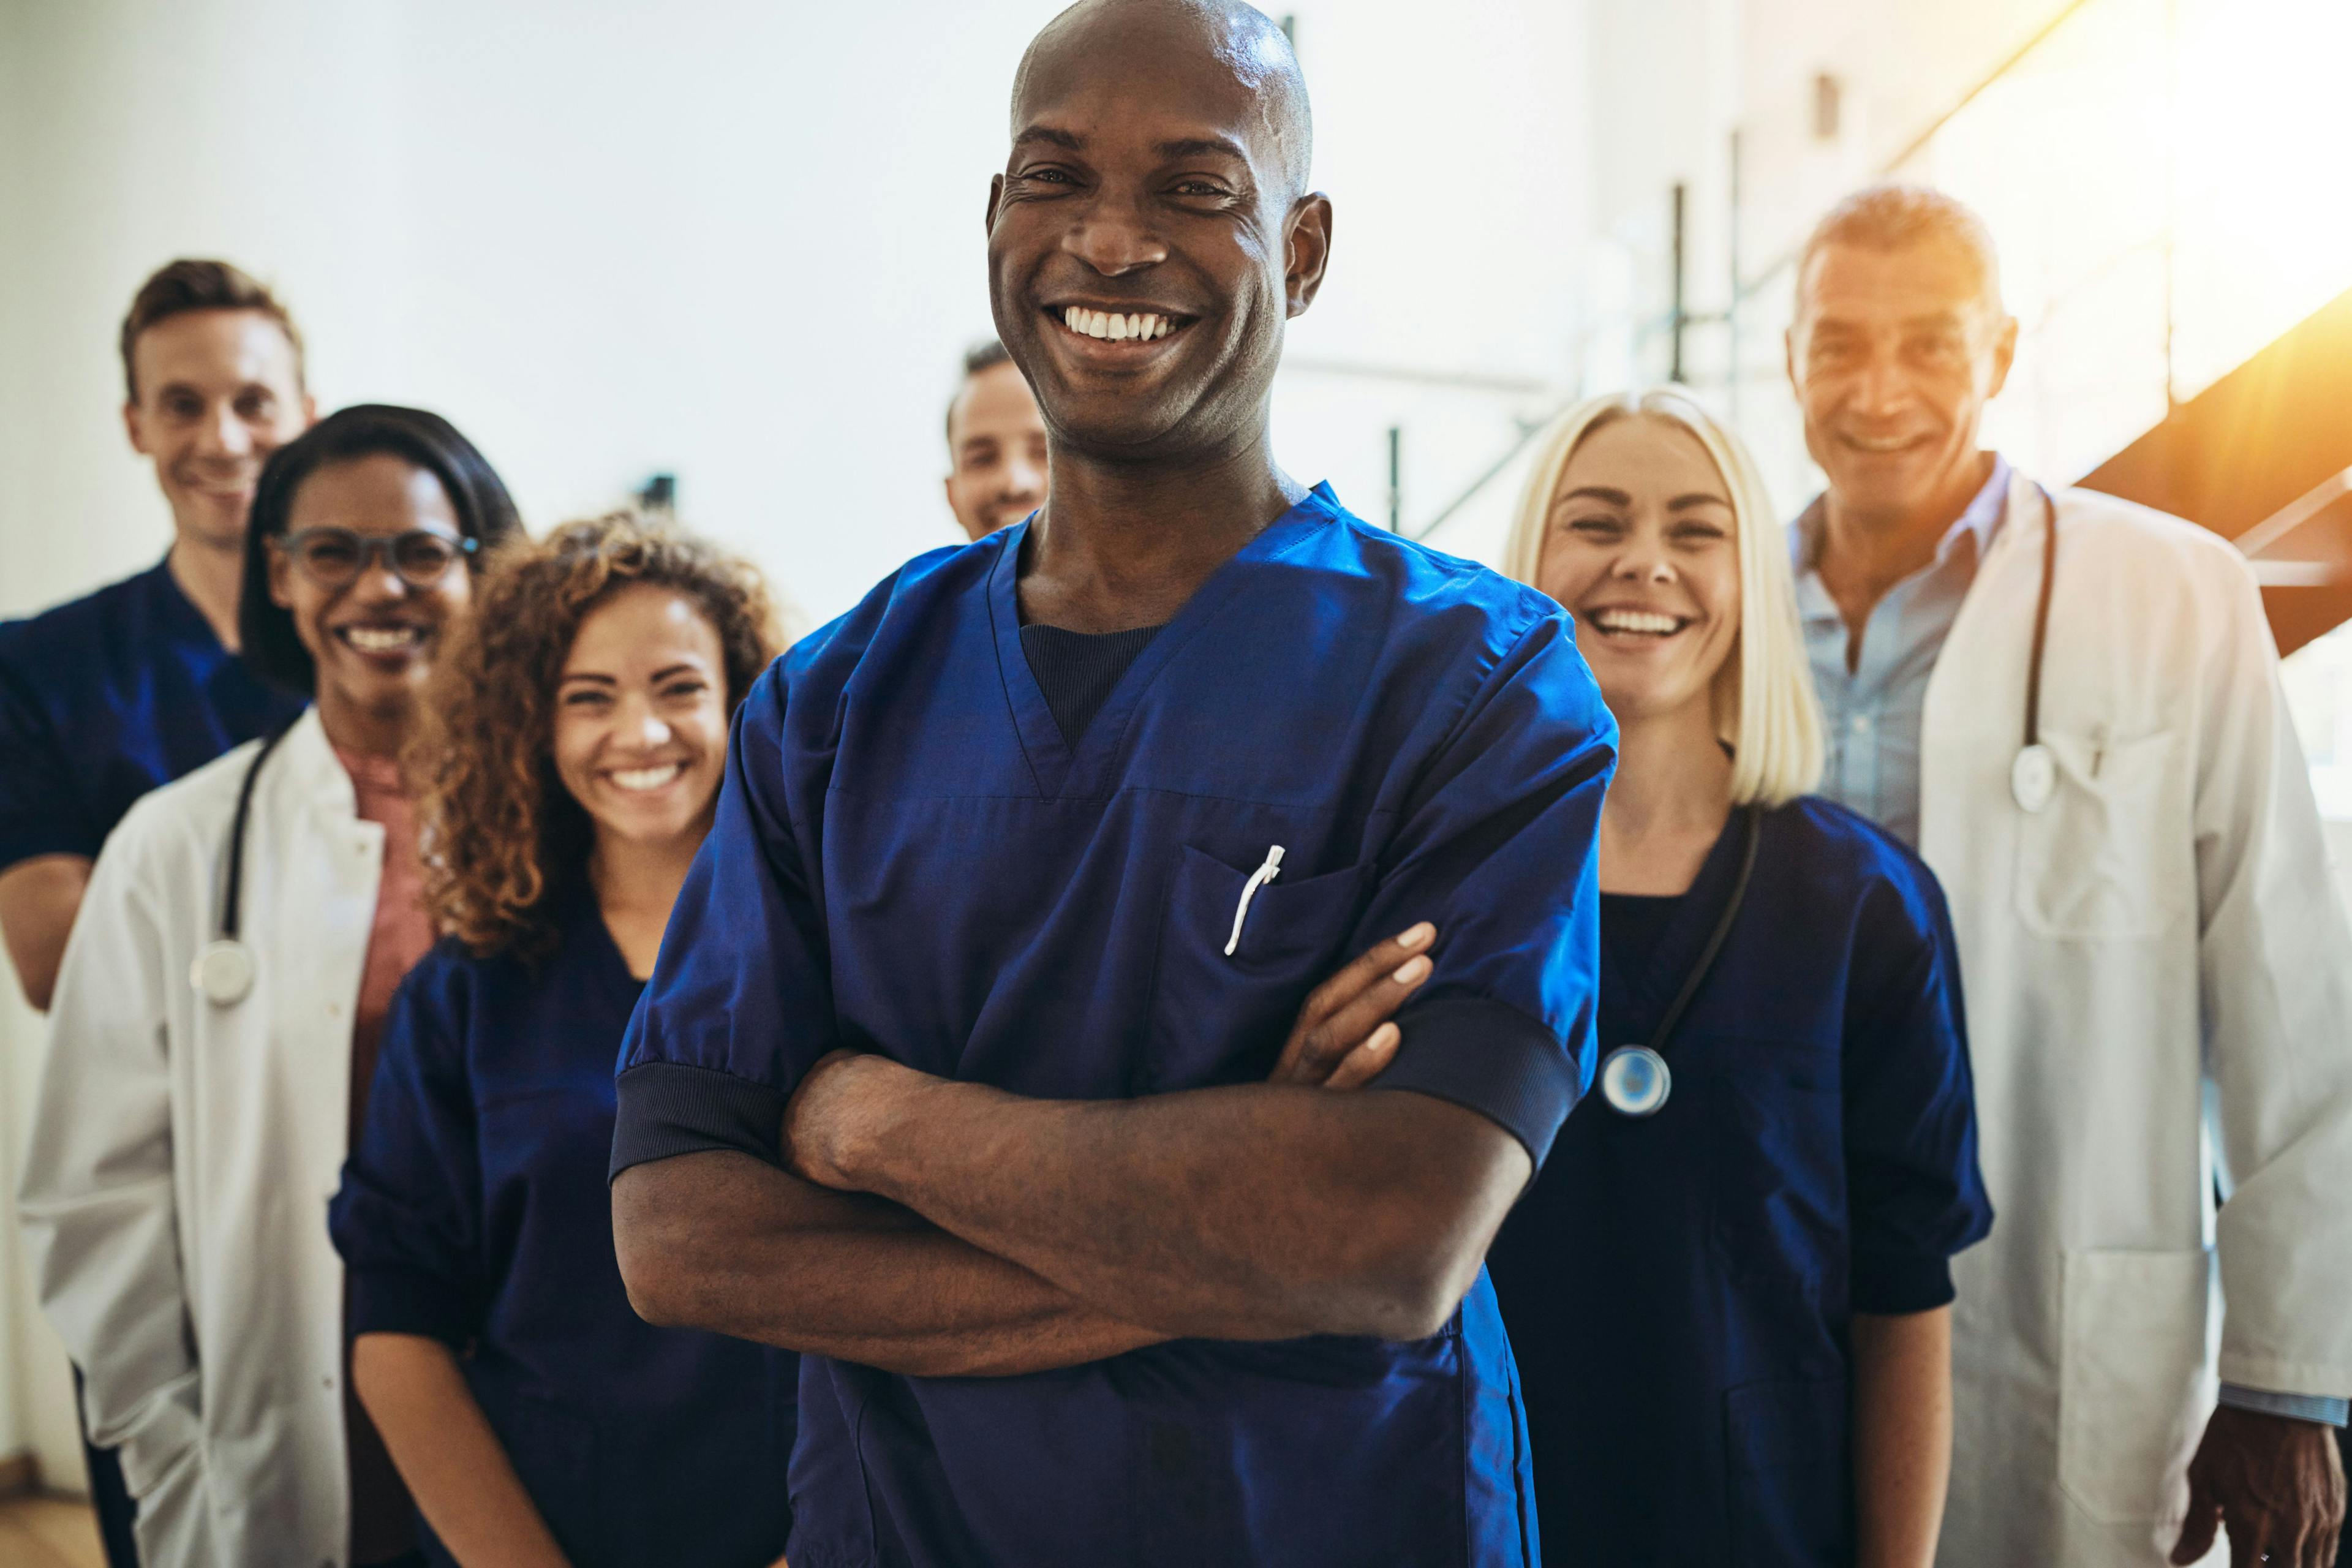 POLL: Are Allied Healthcare Workers Under Appreciated